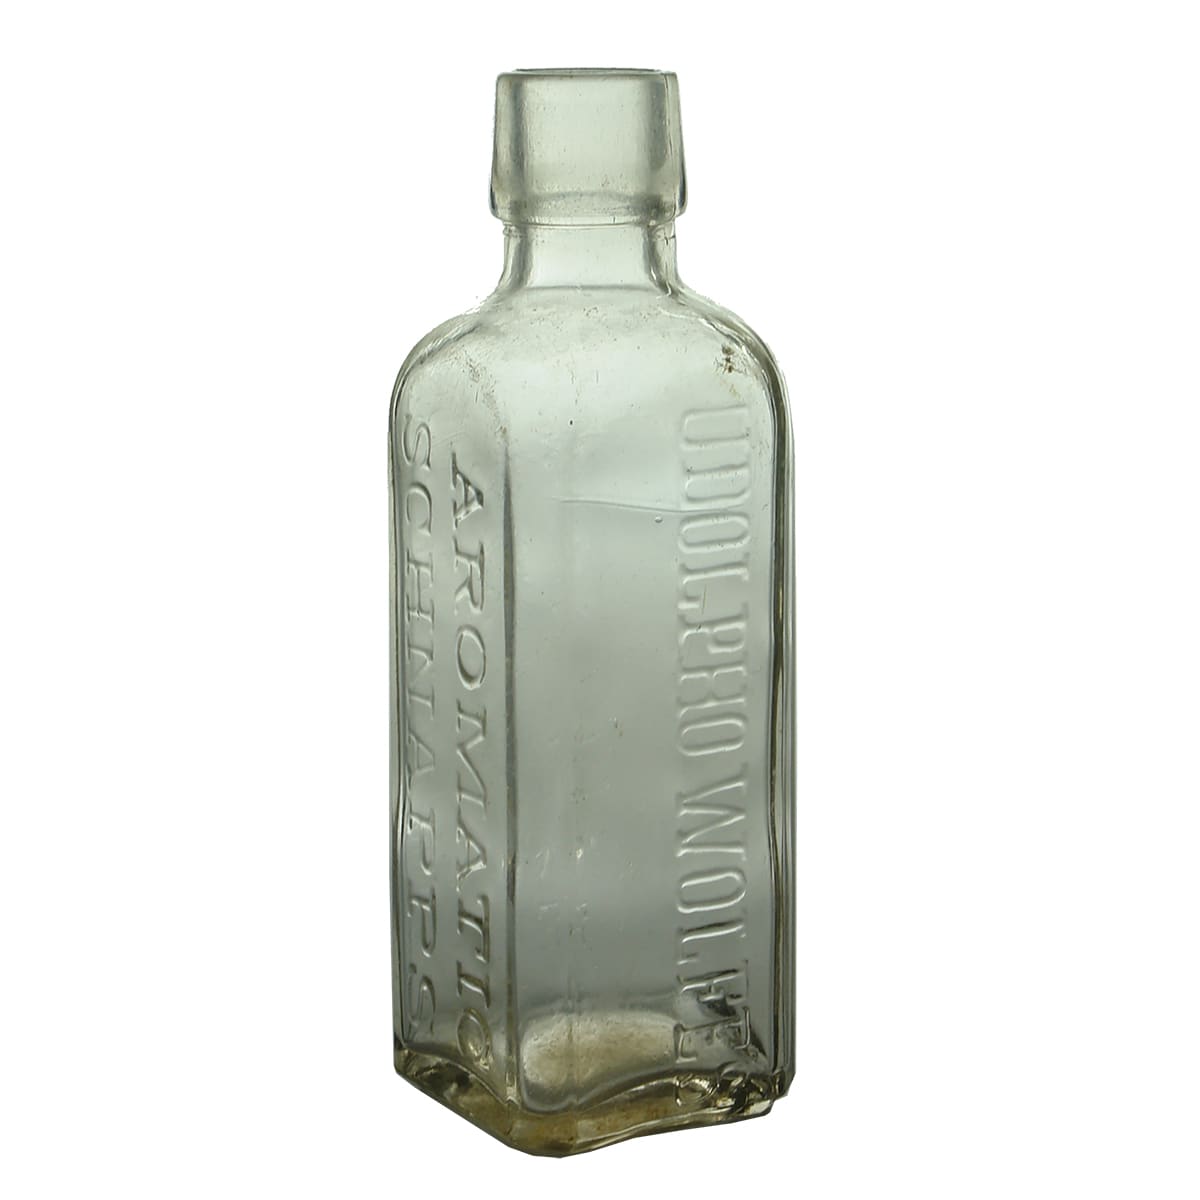 Sample Schnapps. Wolfe's. Clear. 1930s. 4 oz.